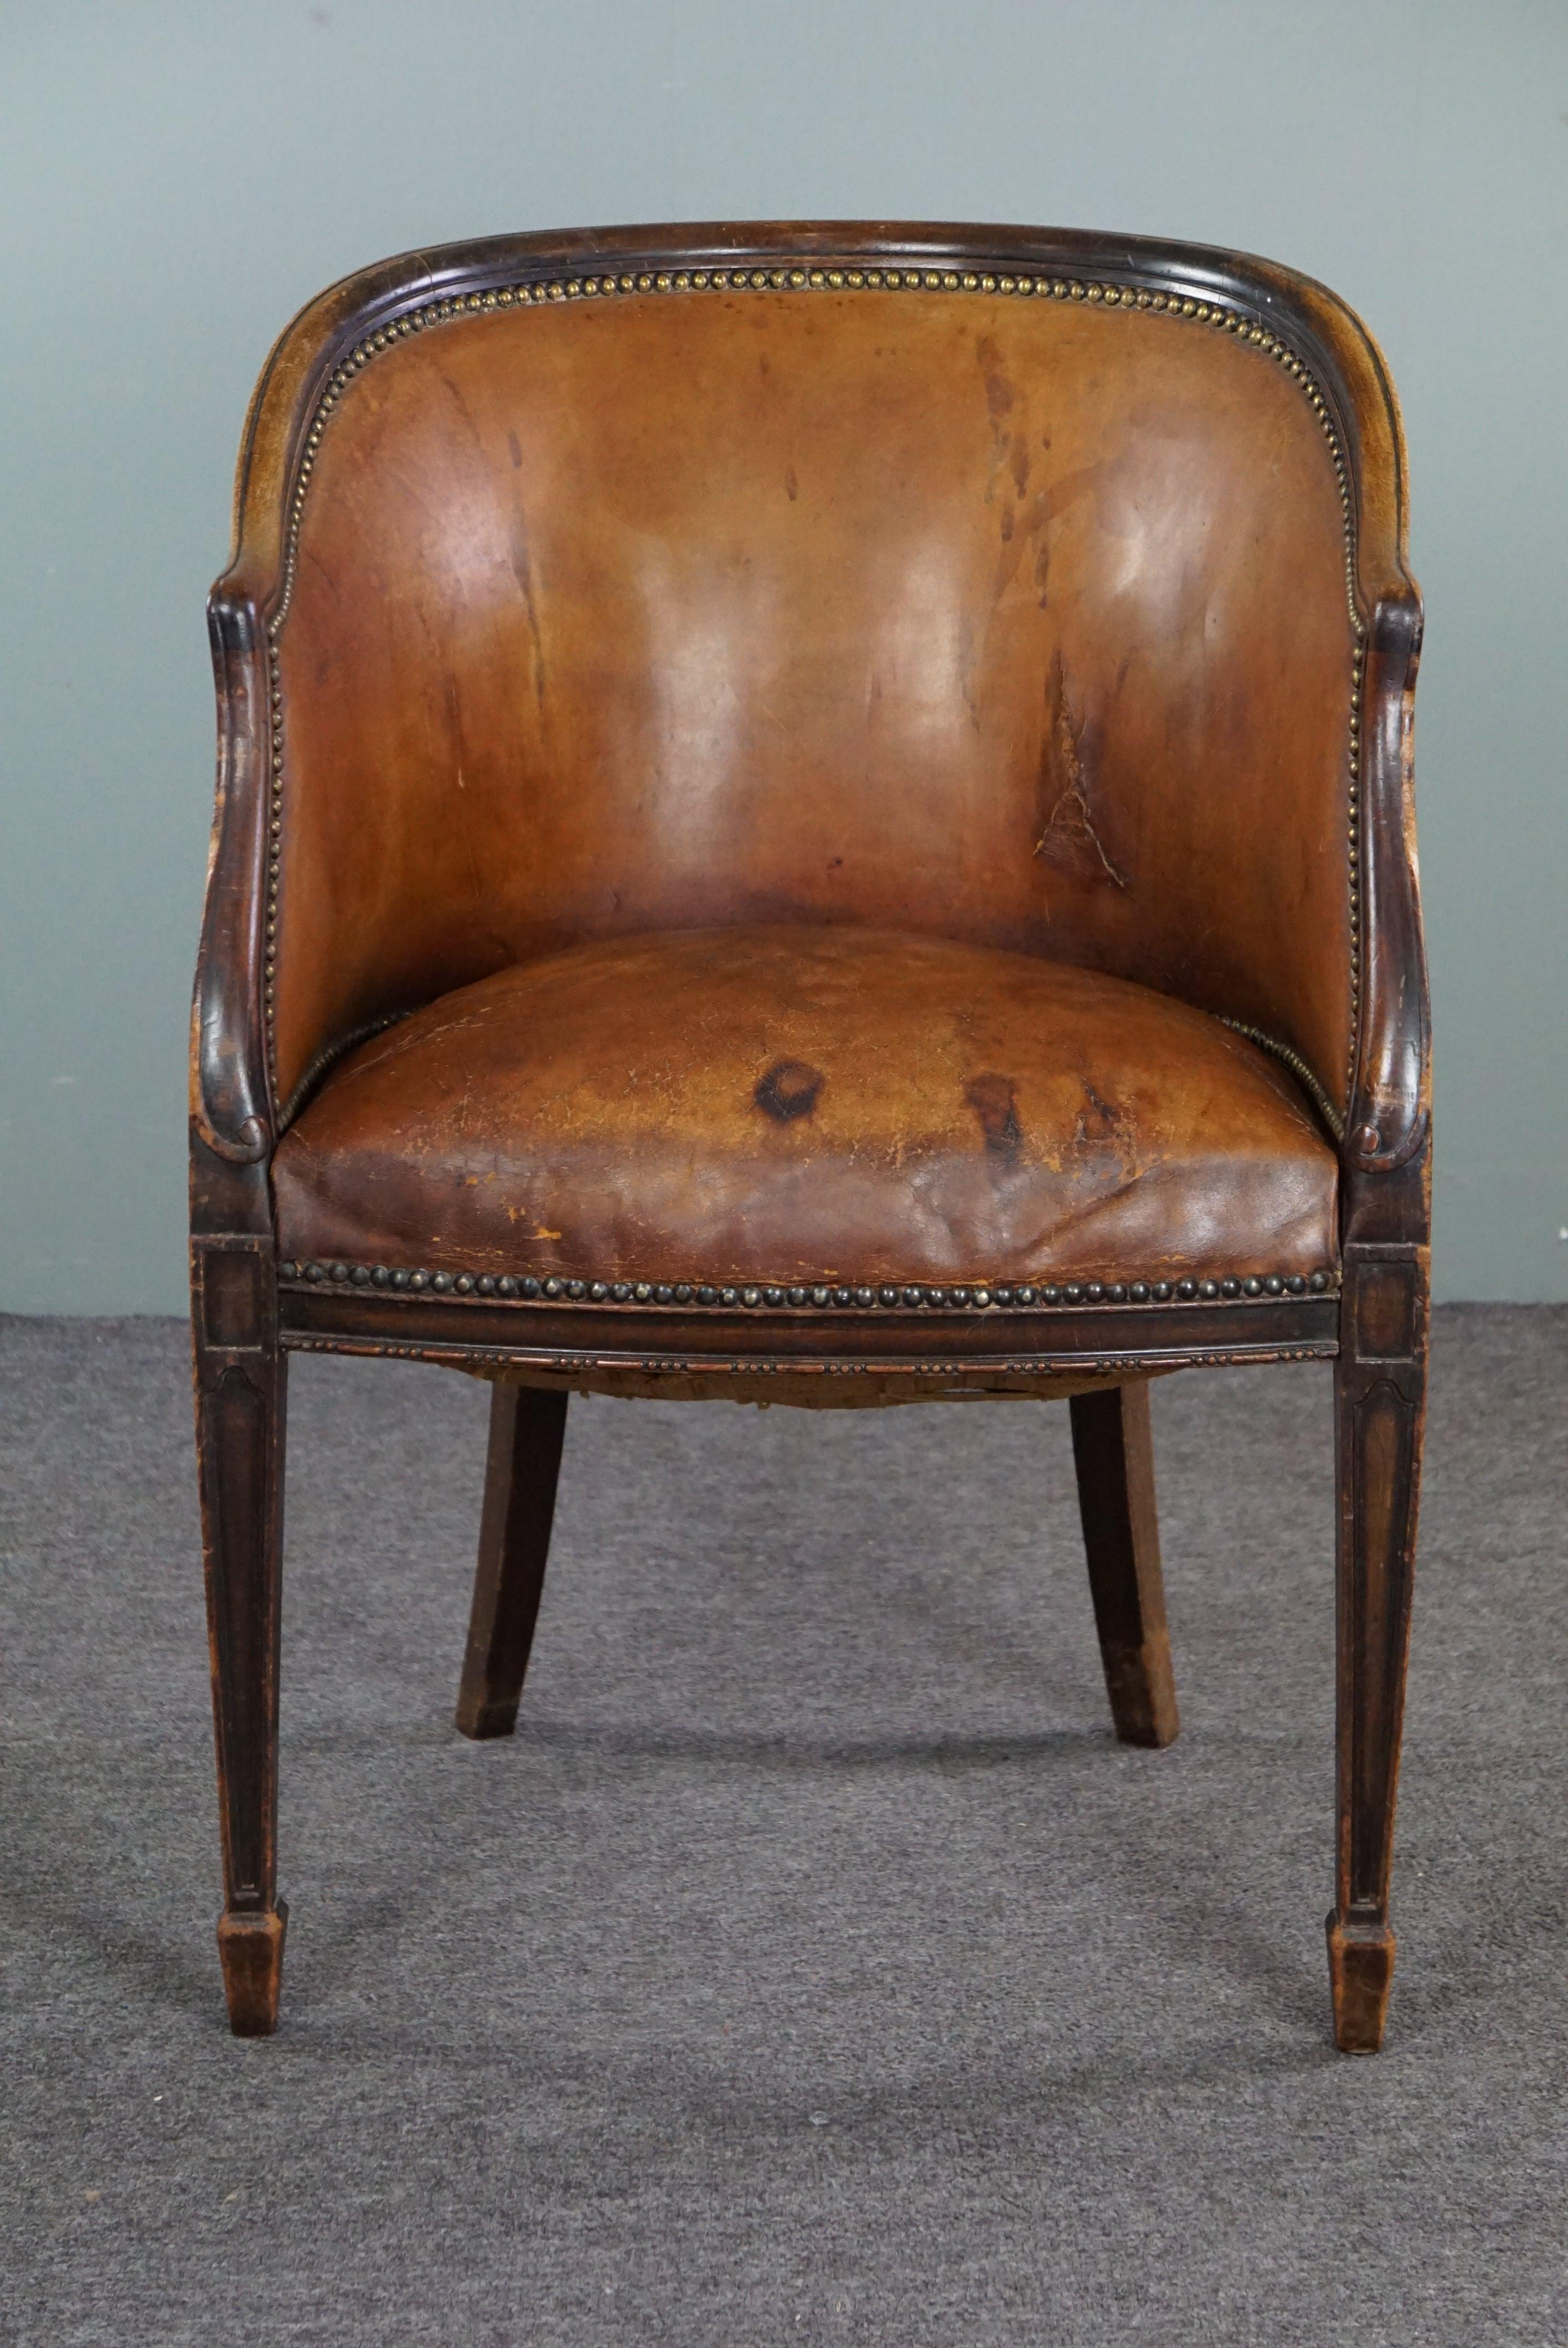 Offered is this antique leather tub chair with plenty of patina and character. 
Discover this extraordinary antique leather tub chair infused with character and a beautifully developed patina. Crafted from stunning cognac-colored leather, this chair